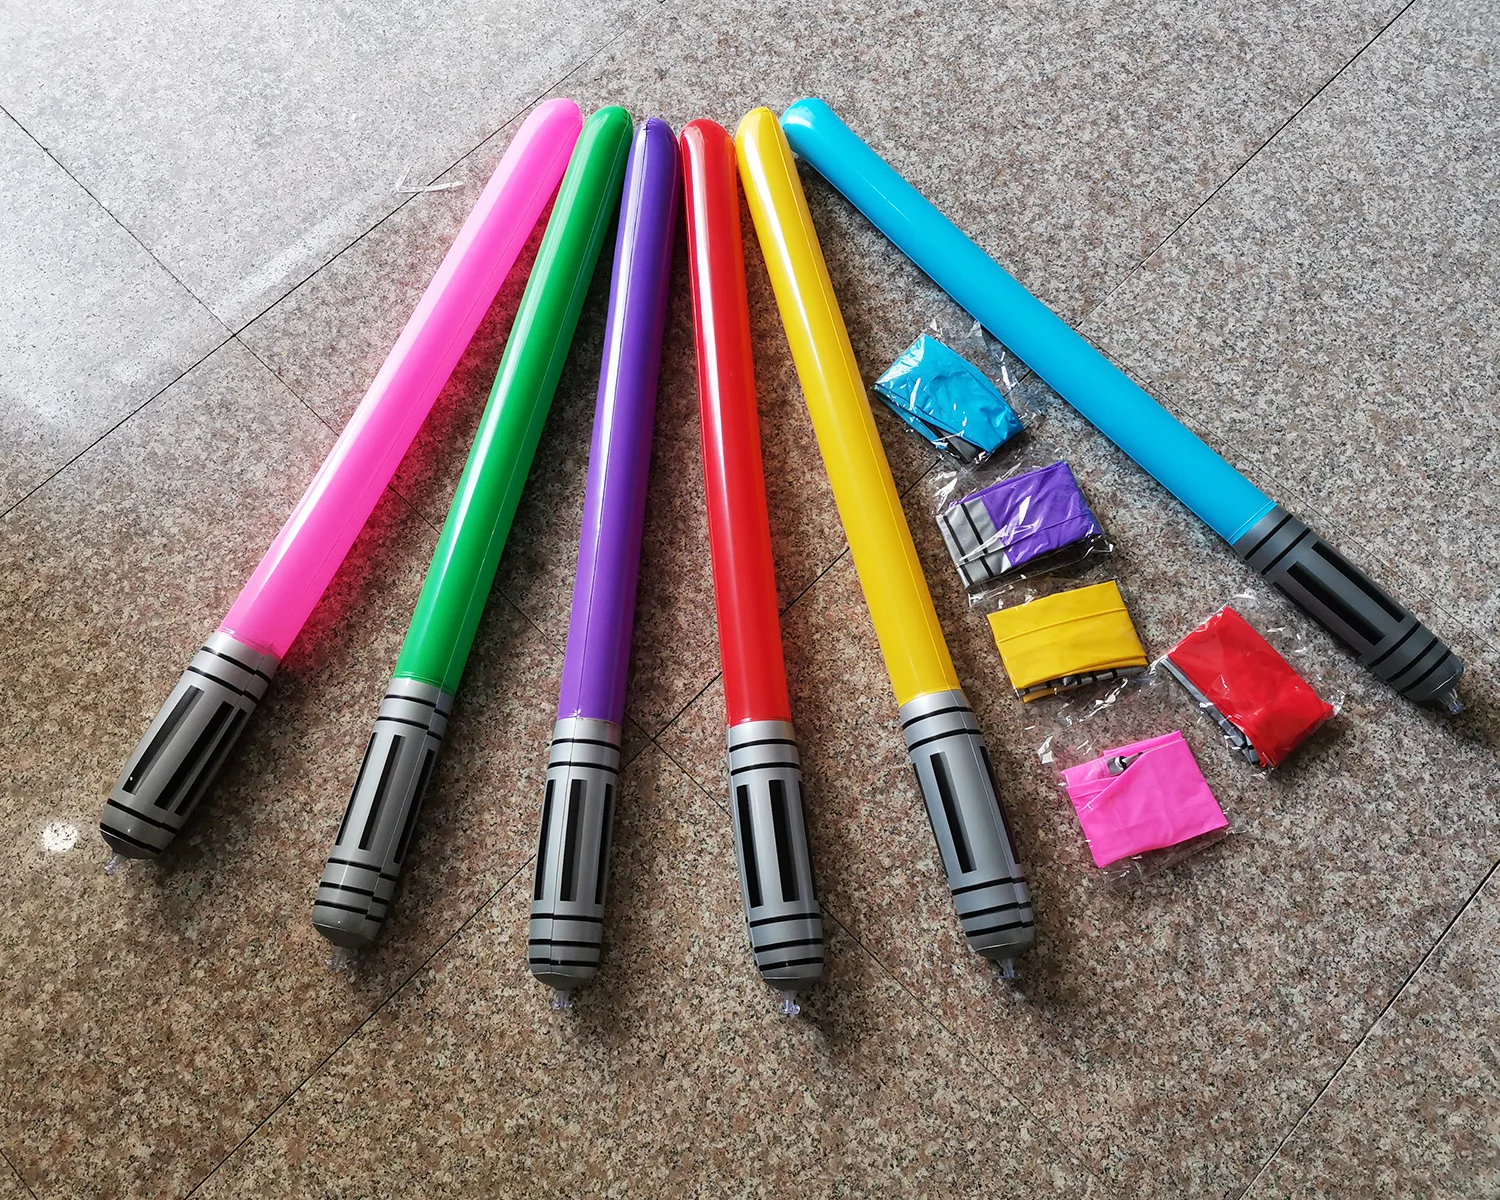 INFLATABLE BLOW UP LIGHT STICK SABRE LIGHTSABER TOY GALAXY WARS STAR 90 cm 